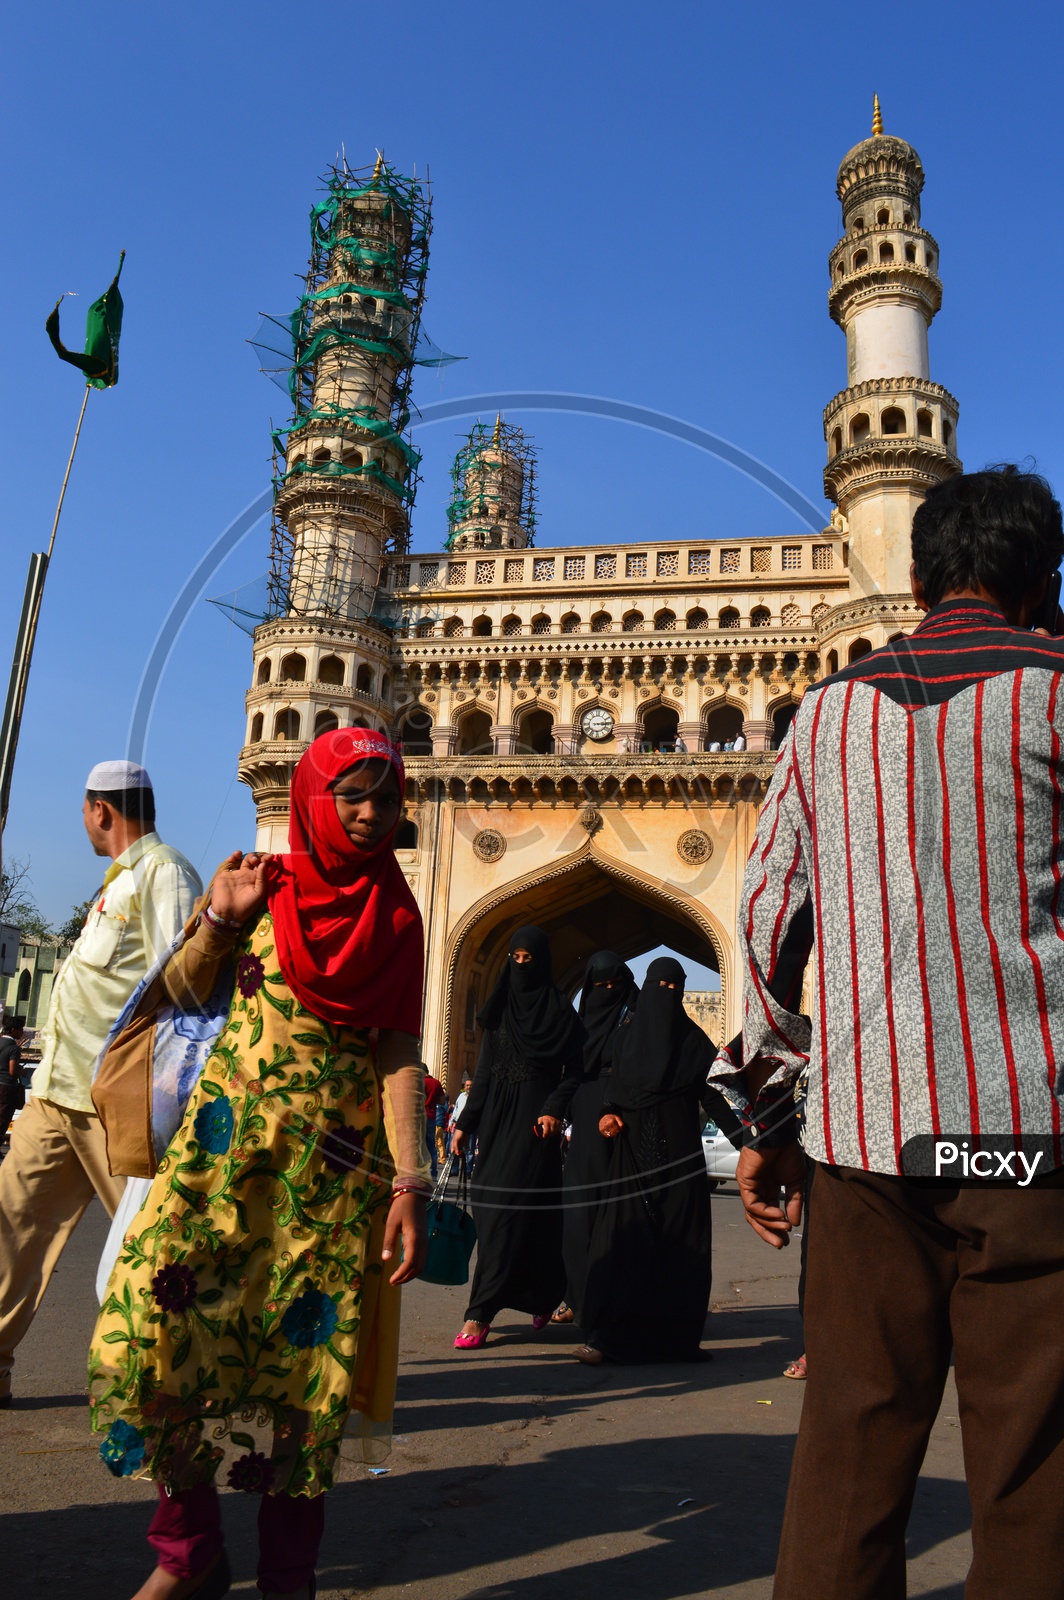 Xxx Video Girl And Girl Bachiya - Image of Muslim Woman and Child At Charminar Streets-PC980143-Picxy